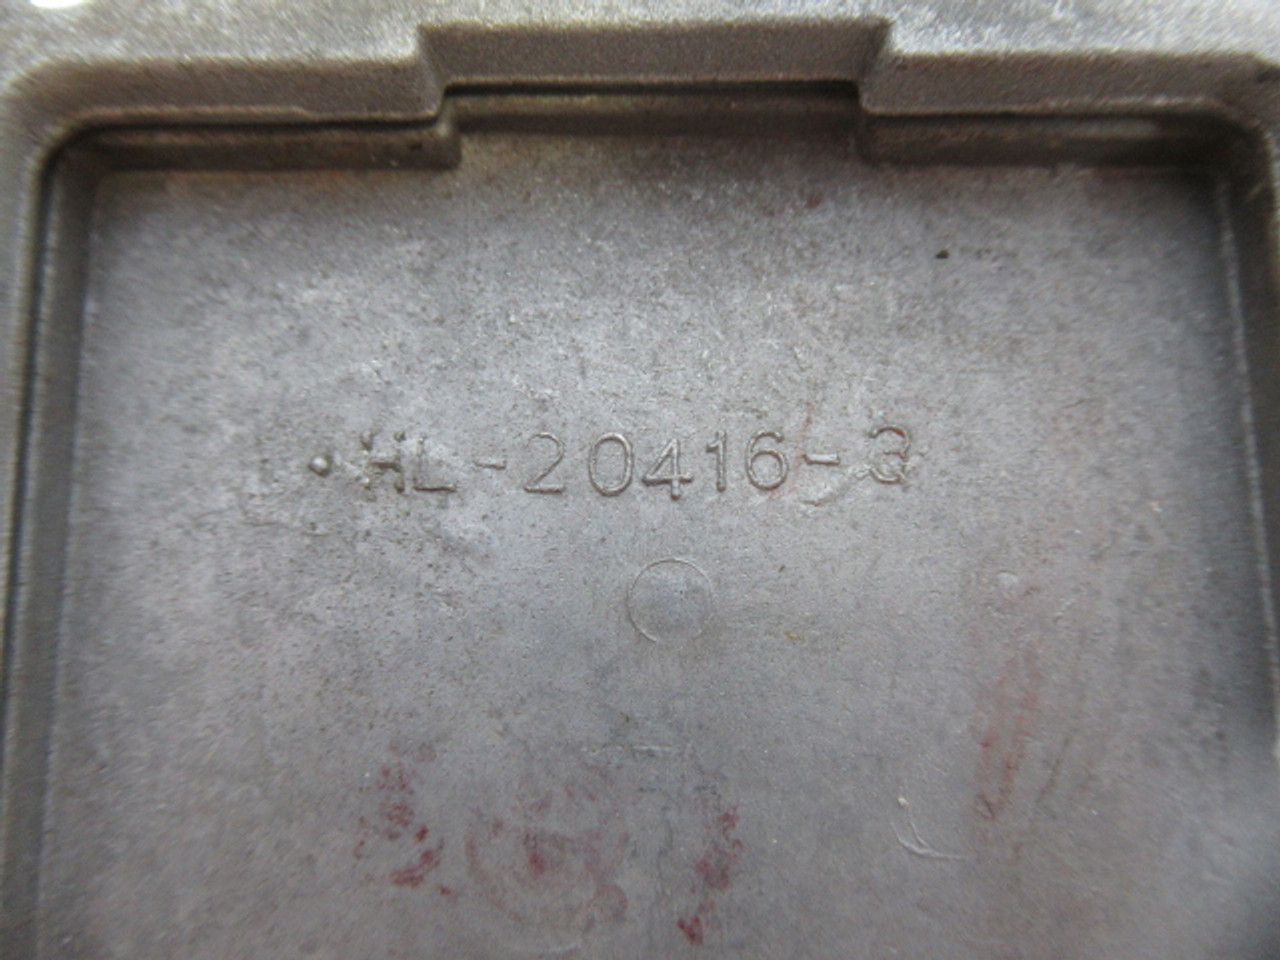 H&H HL-20416-3 Cast Aluminum Plate With Lift Cover 4-1/2"x2-3/4" USED